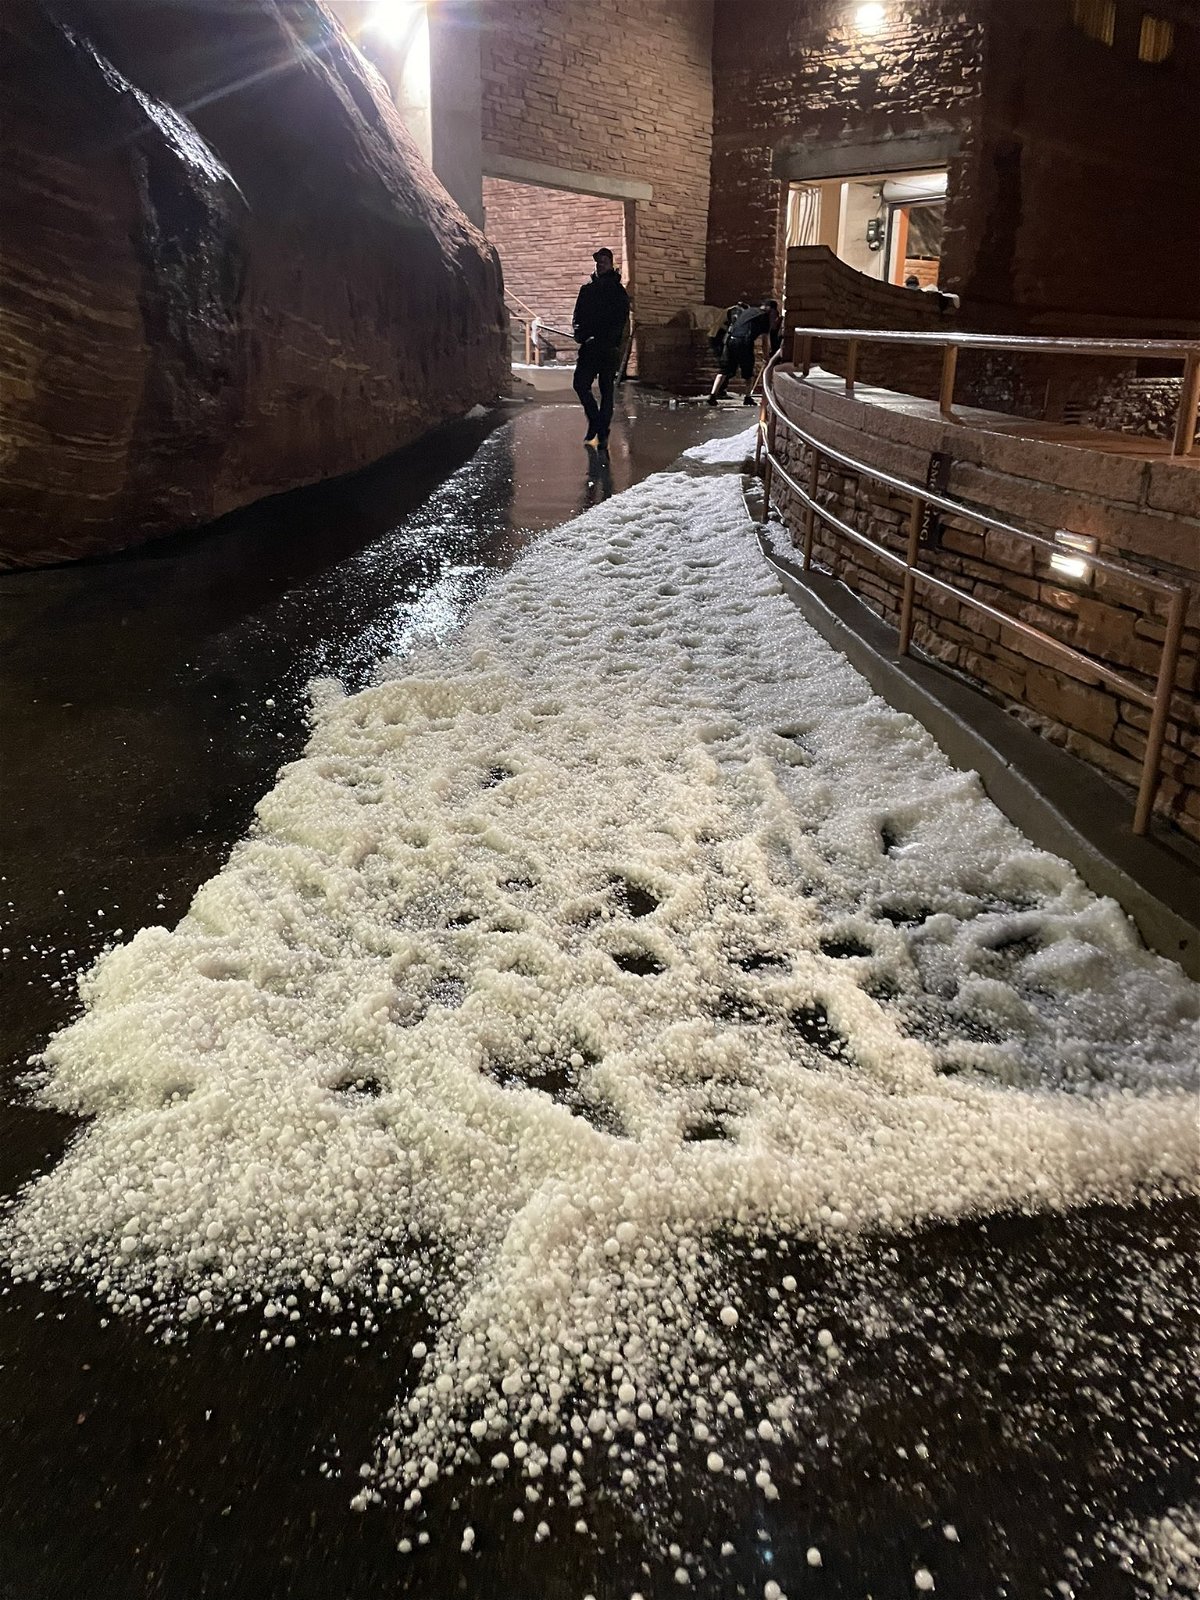 Red Rocks releases statement after Wednesday night's hail storm that